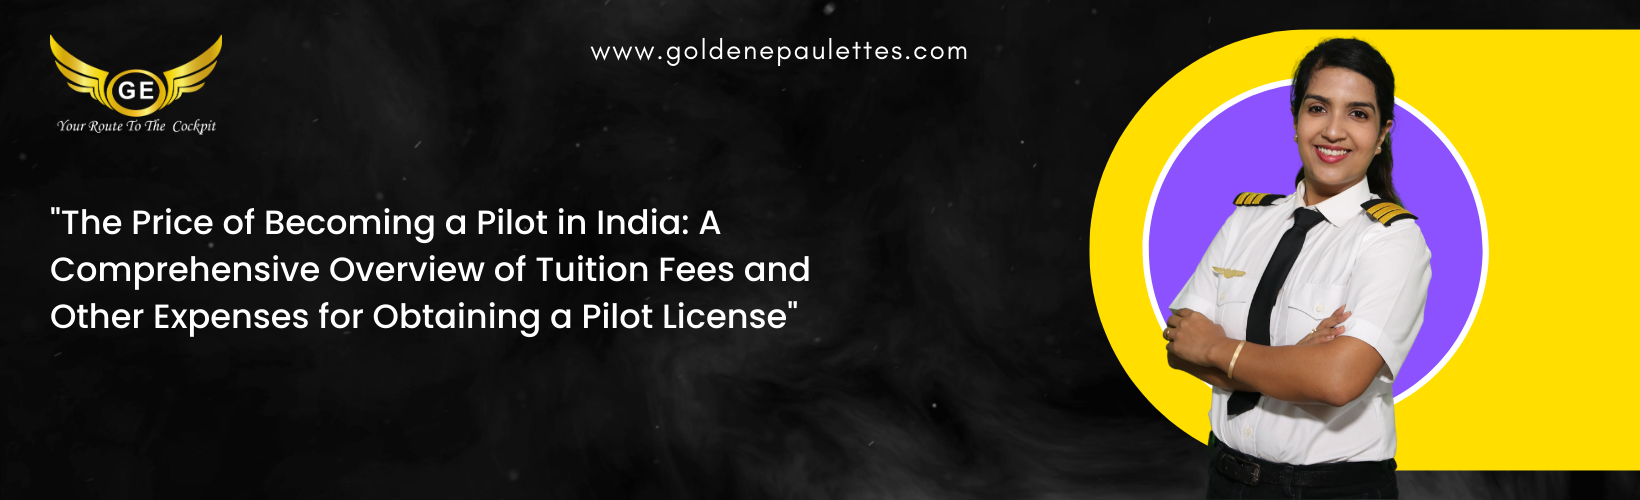 The Cost of Obtaining a Pilot License in India